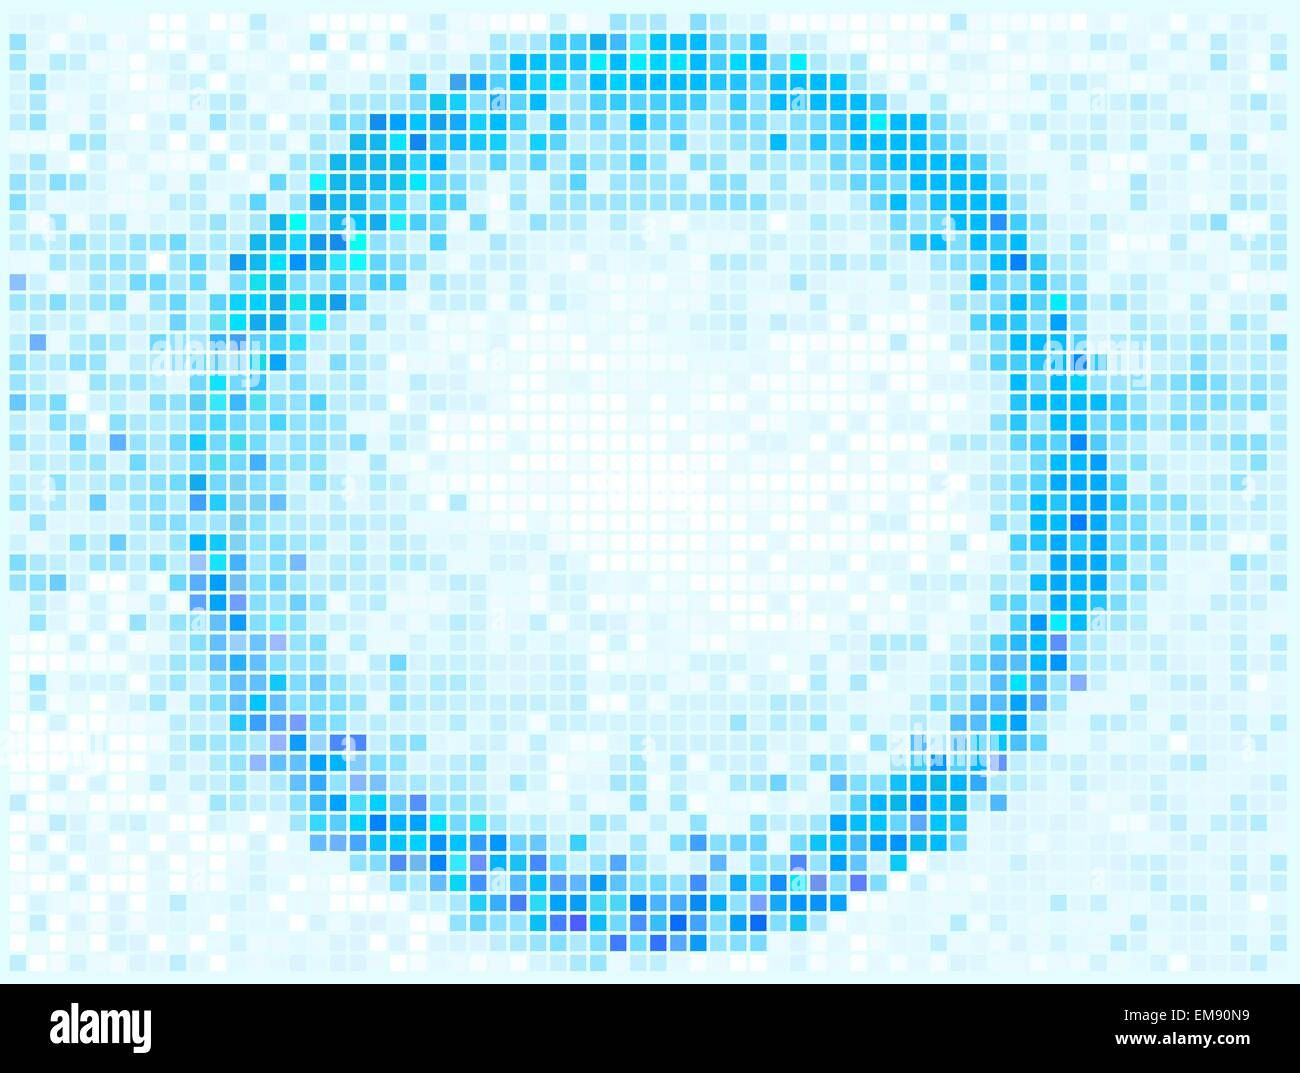 Round Square Pixel Mosaic Vector Banner. Abstract Lights Tile Ge Stock Vector